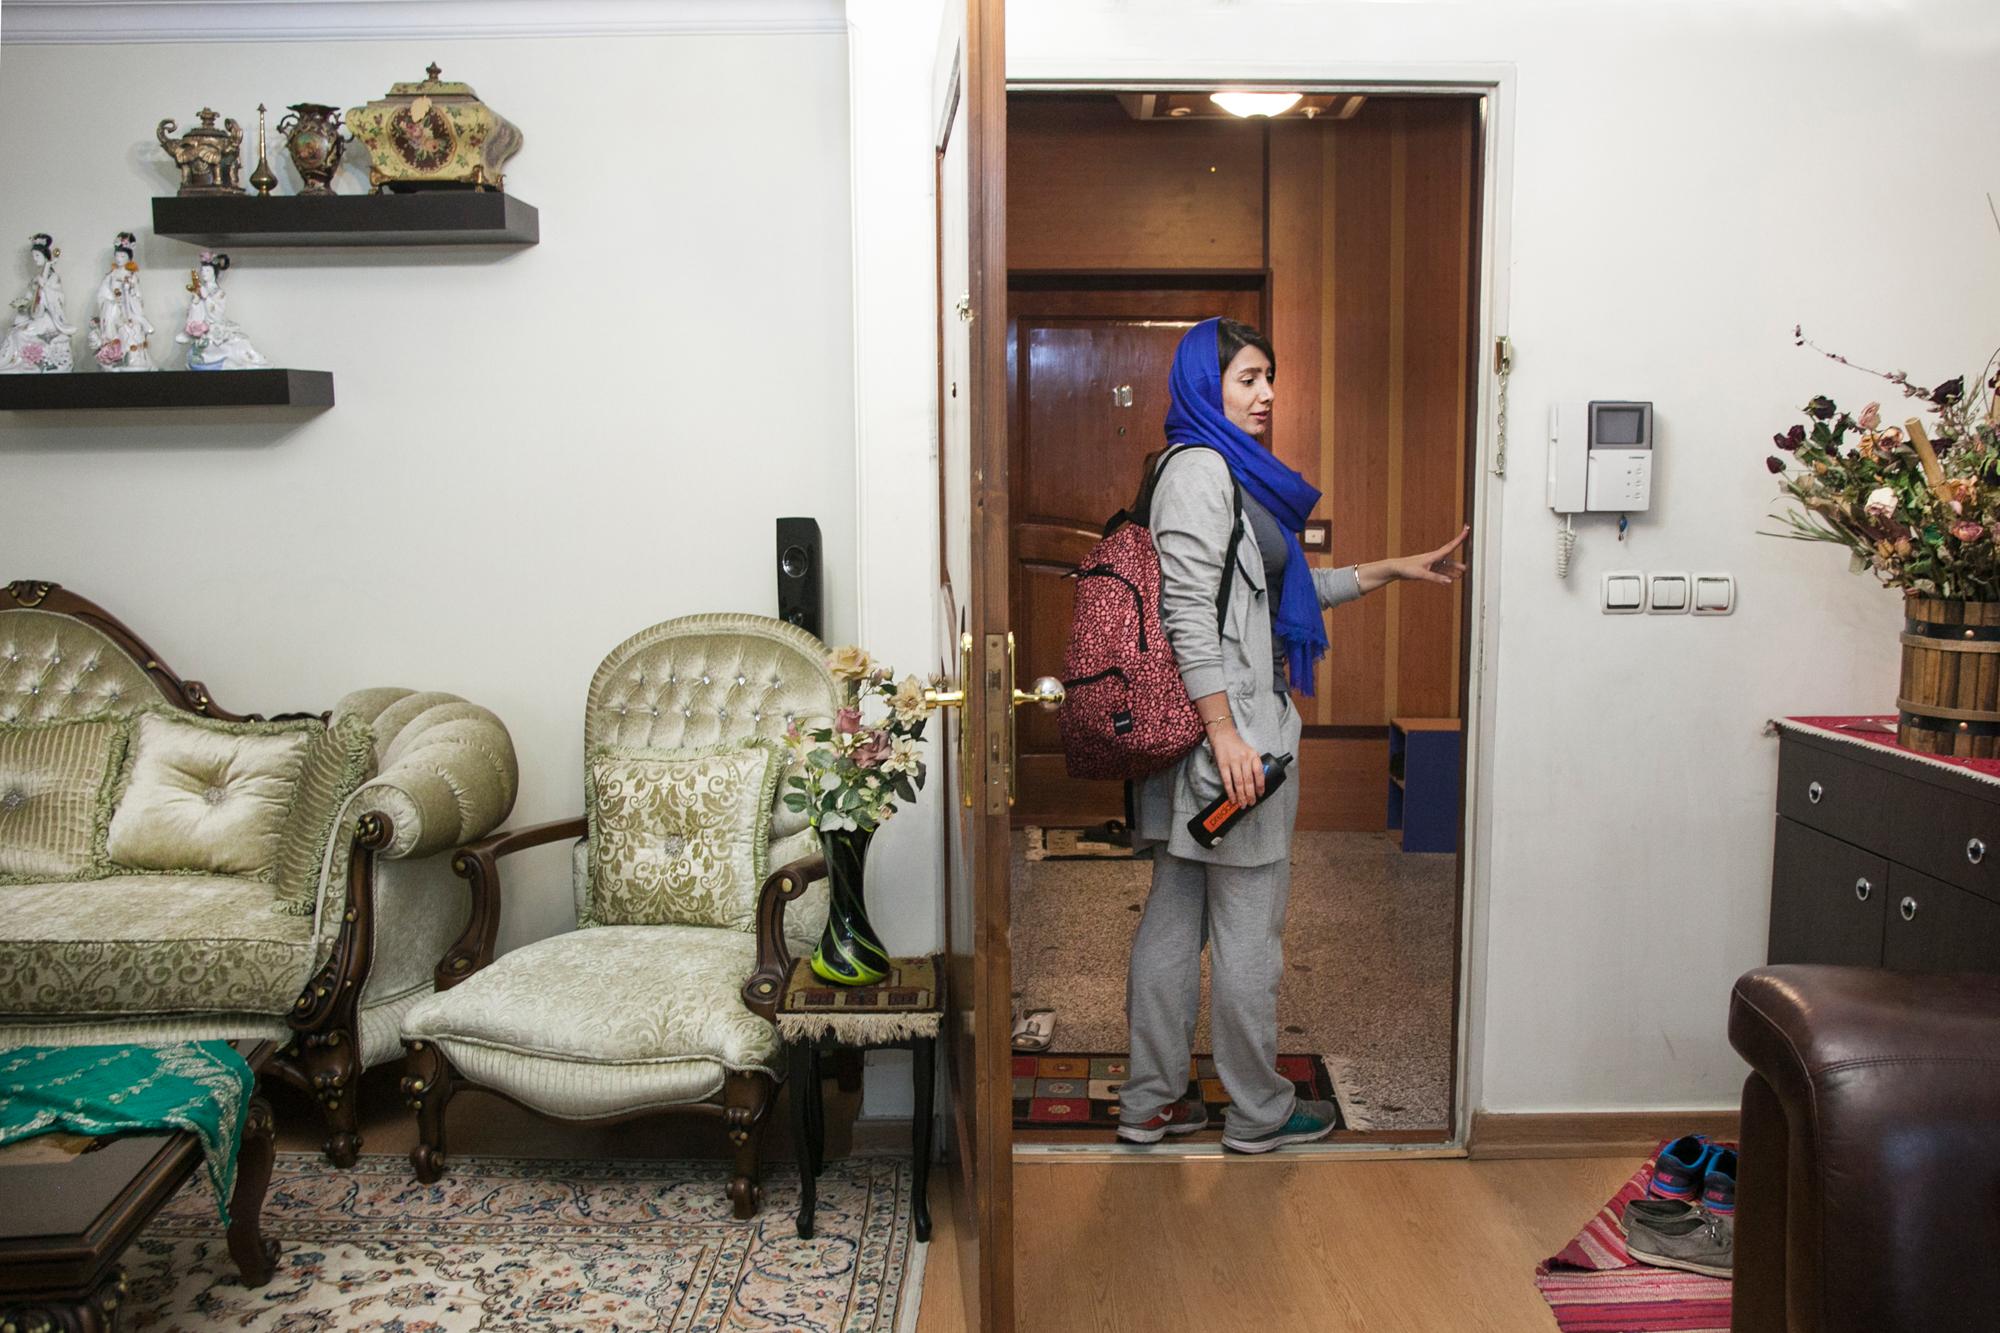 Tehran : the faces of women's empowerment - Gunay, is passionate about sports. Although legislation...